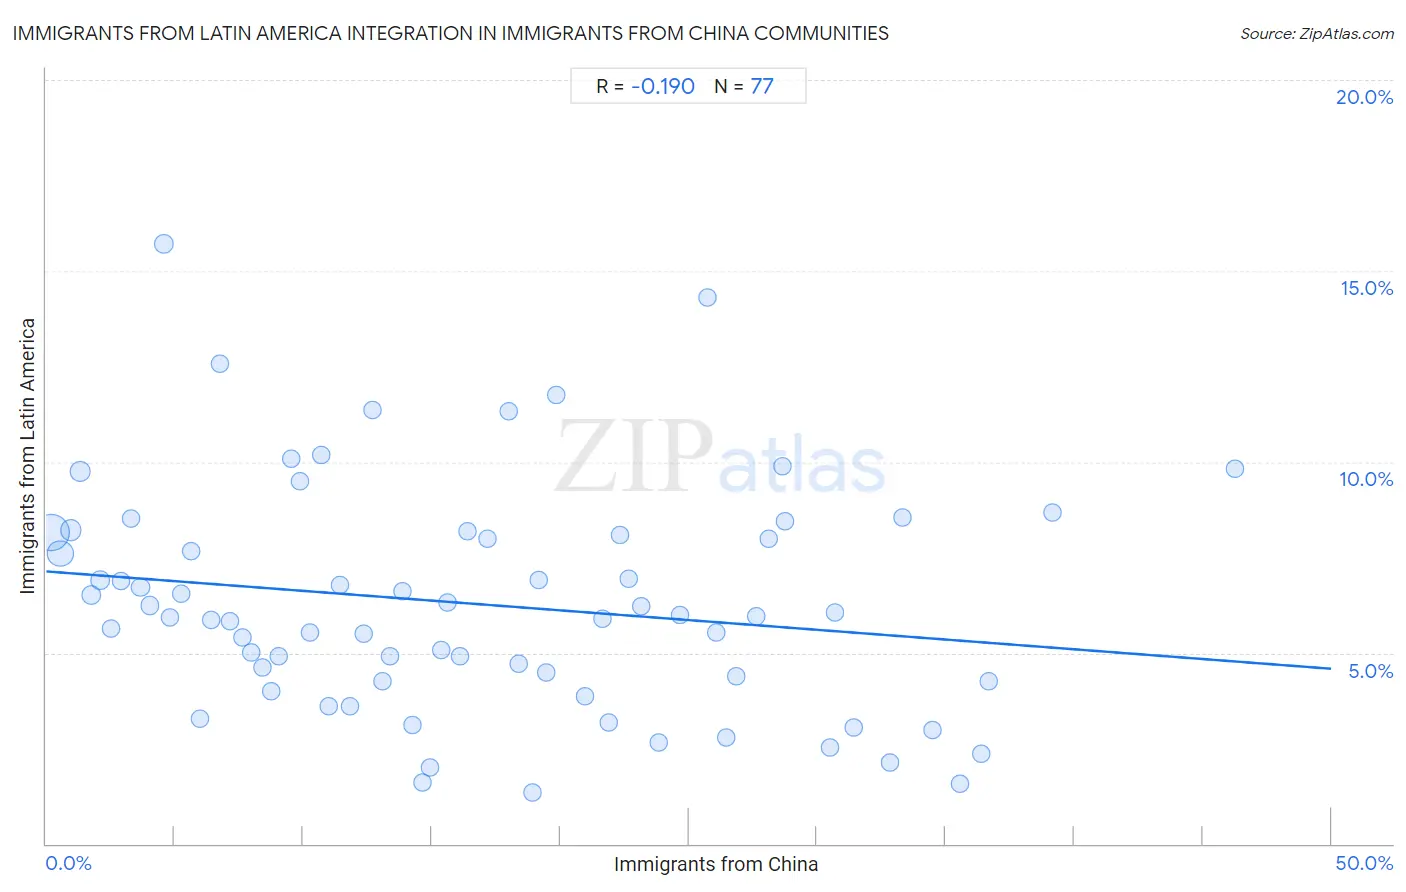 Immigrants from China Integration in Immigrants from Latin America Communities